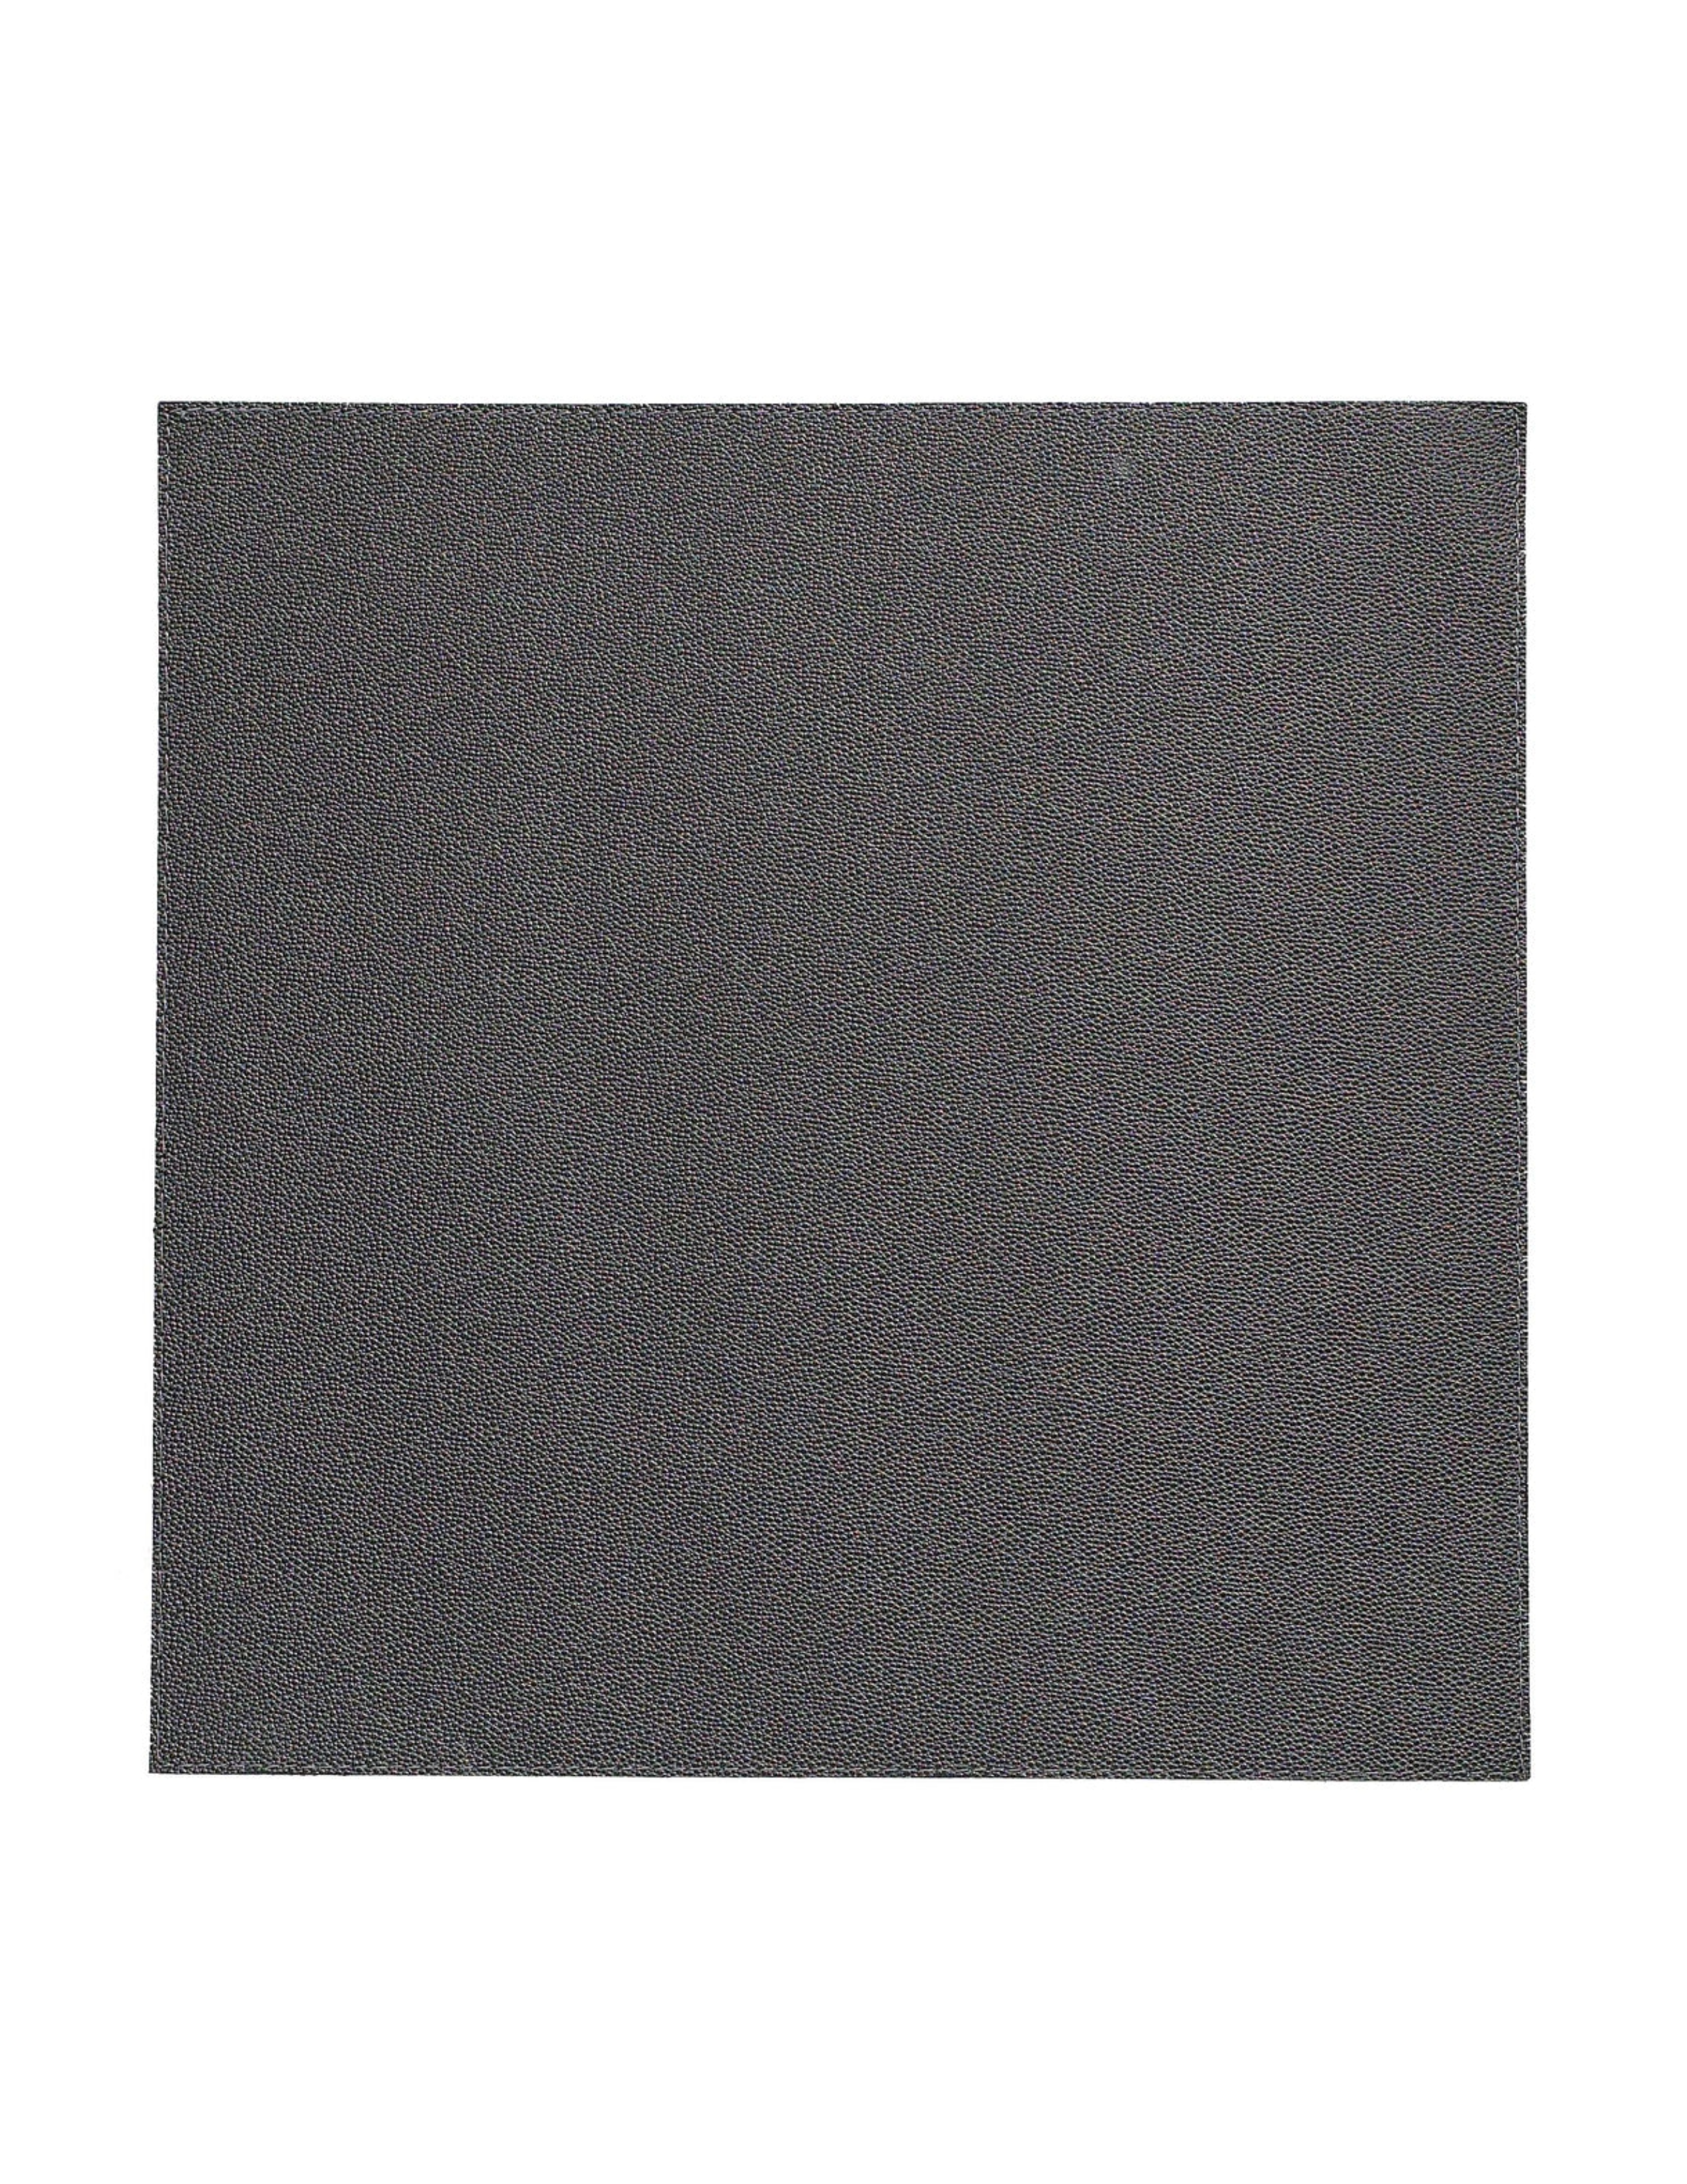 Skate Square Placemat Set/4 - Charcoal